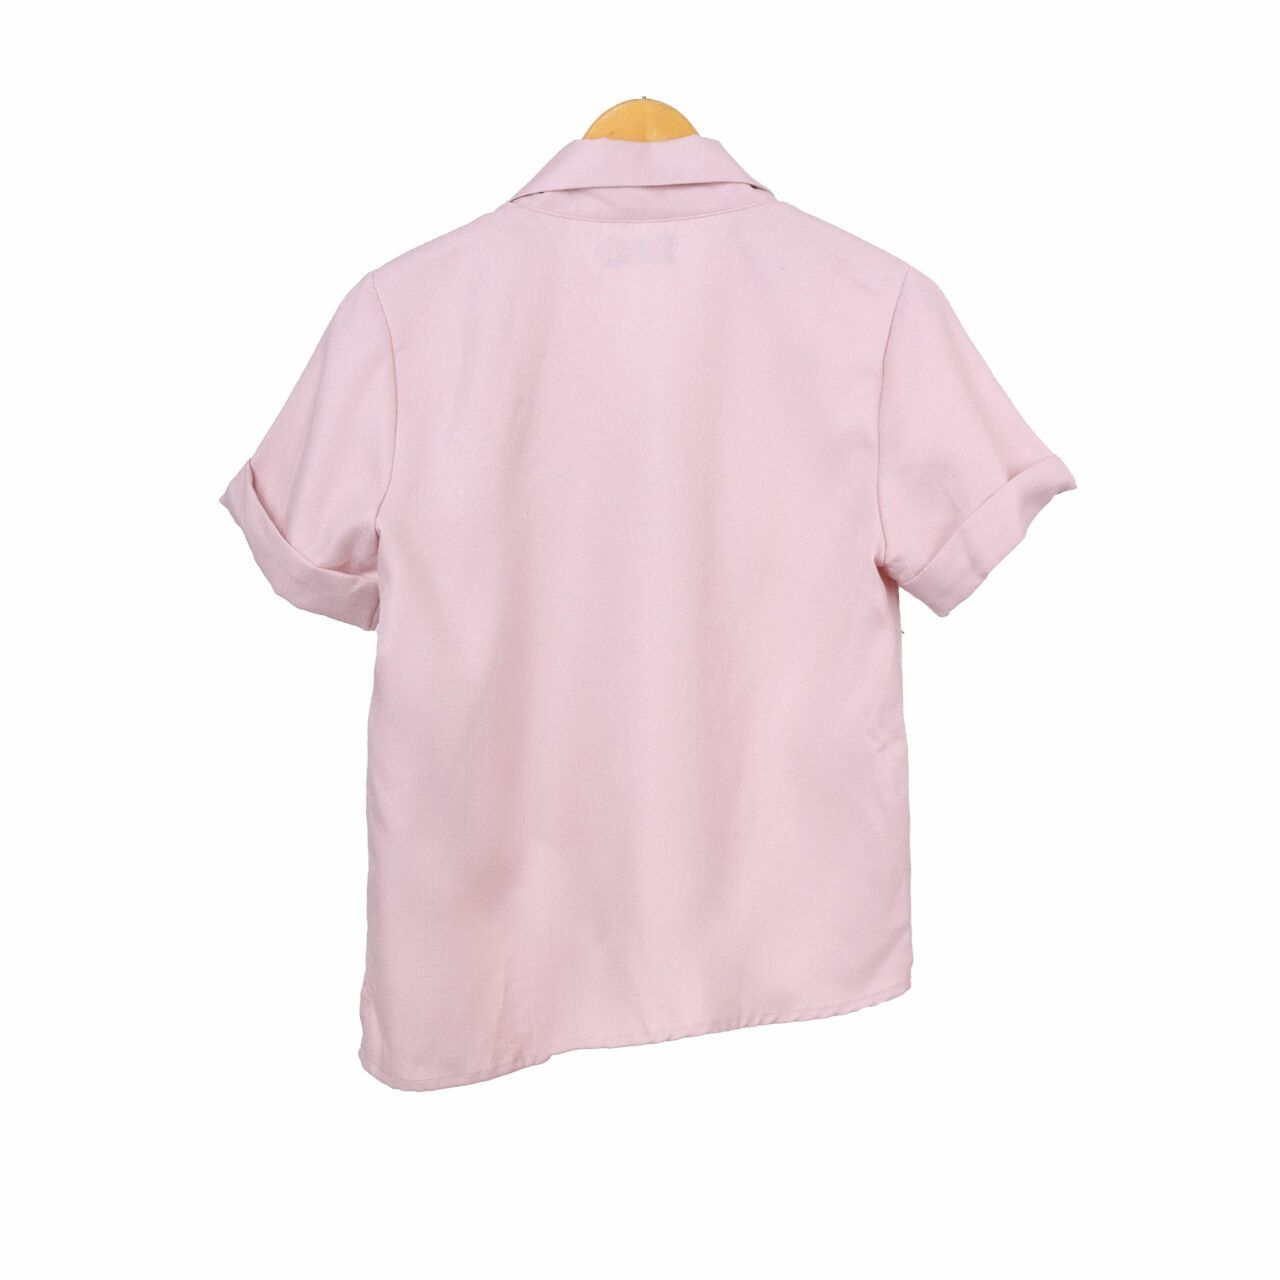 Label Eight Soft Pink Blouse